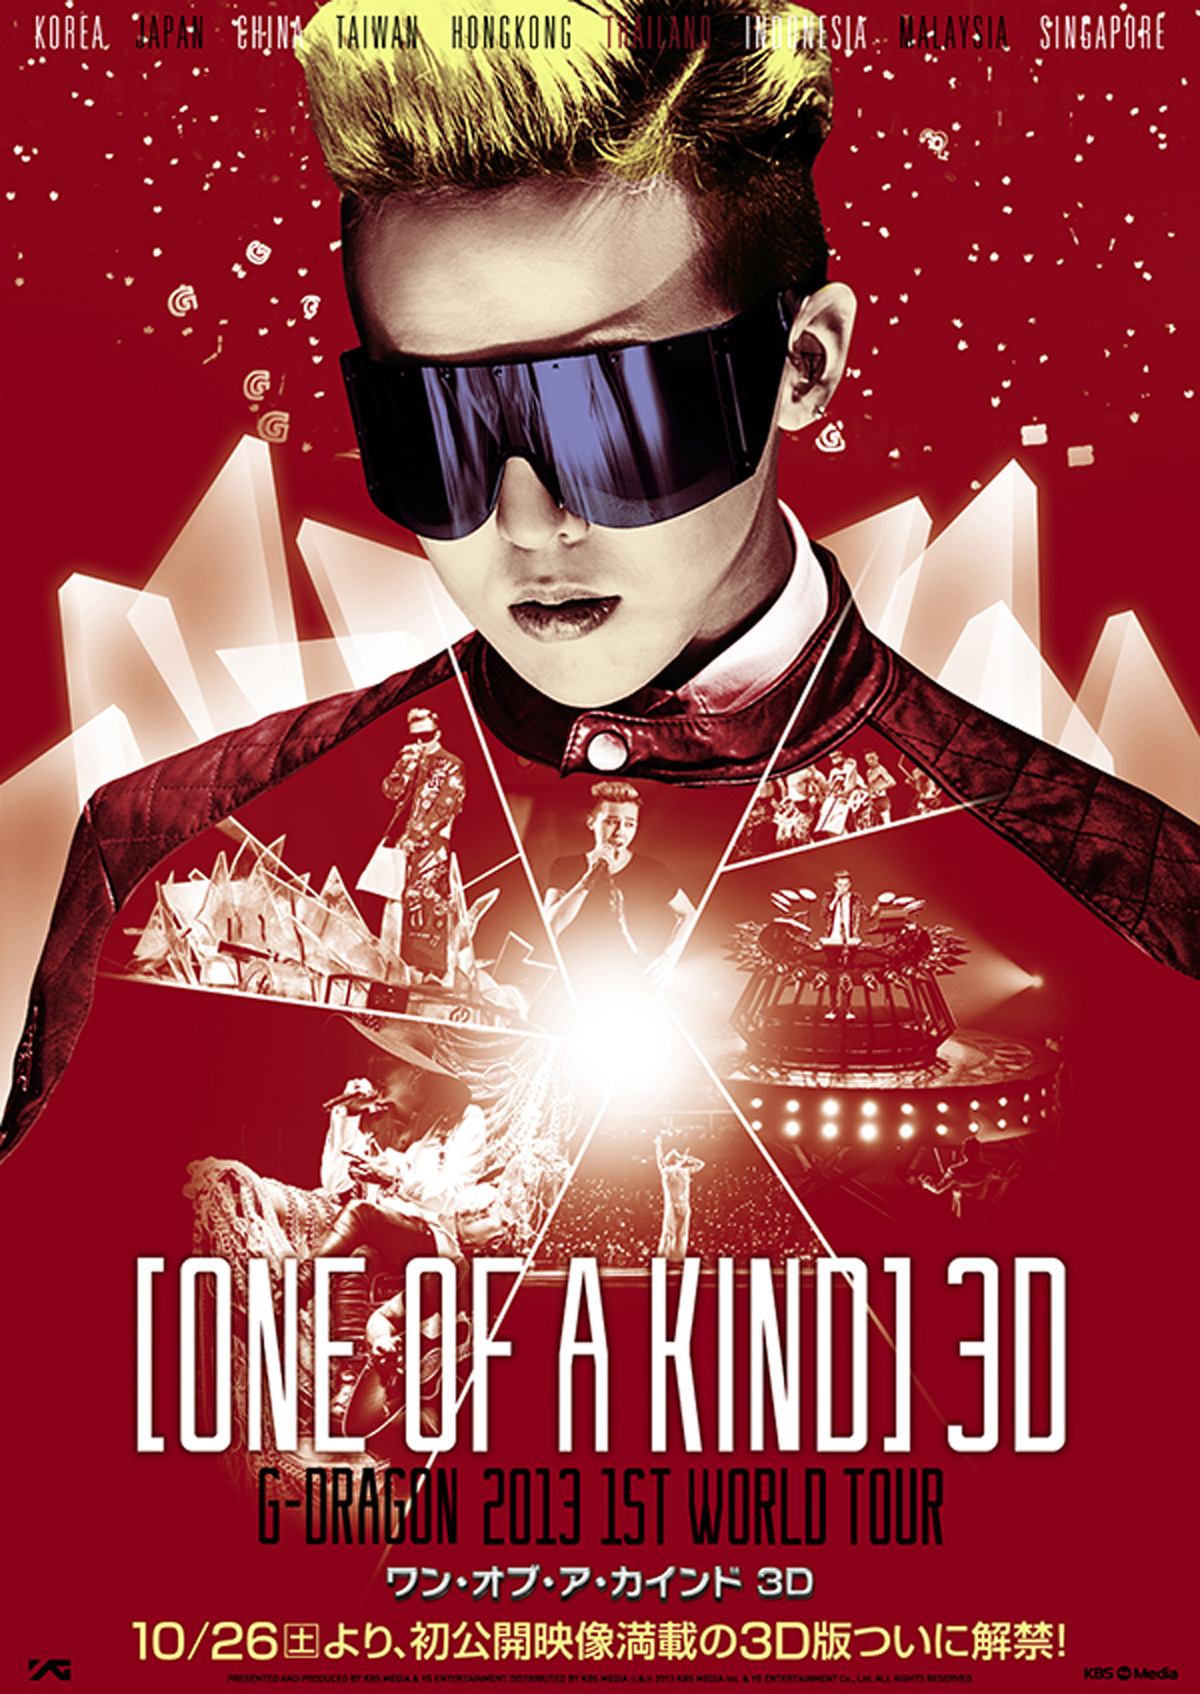 ONE OF A KIND 3D ～G-DRAGON 2013 1ST WORLD TOUR～の画像